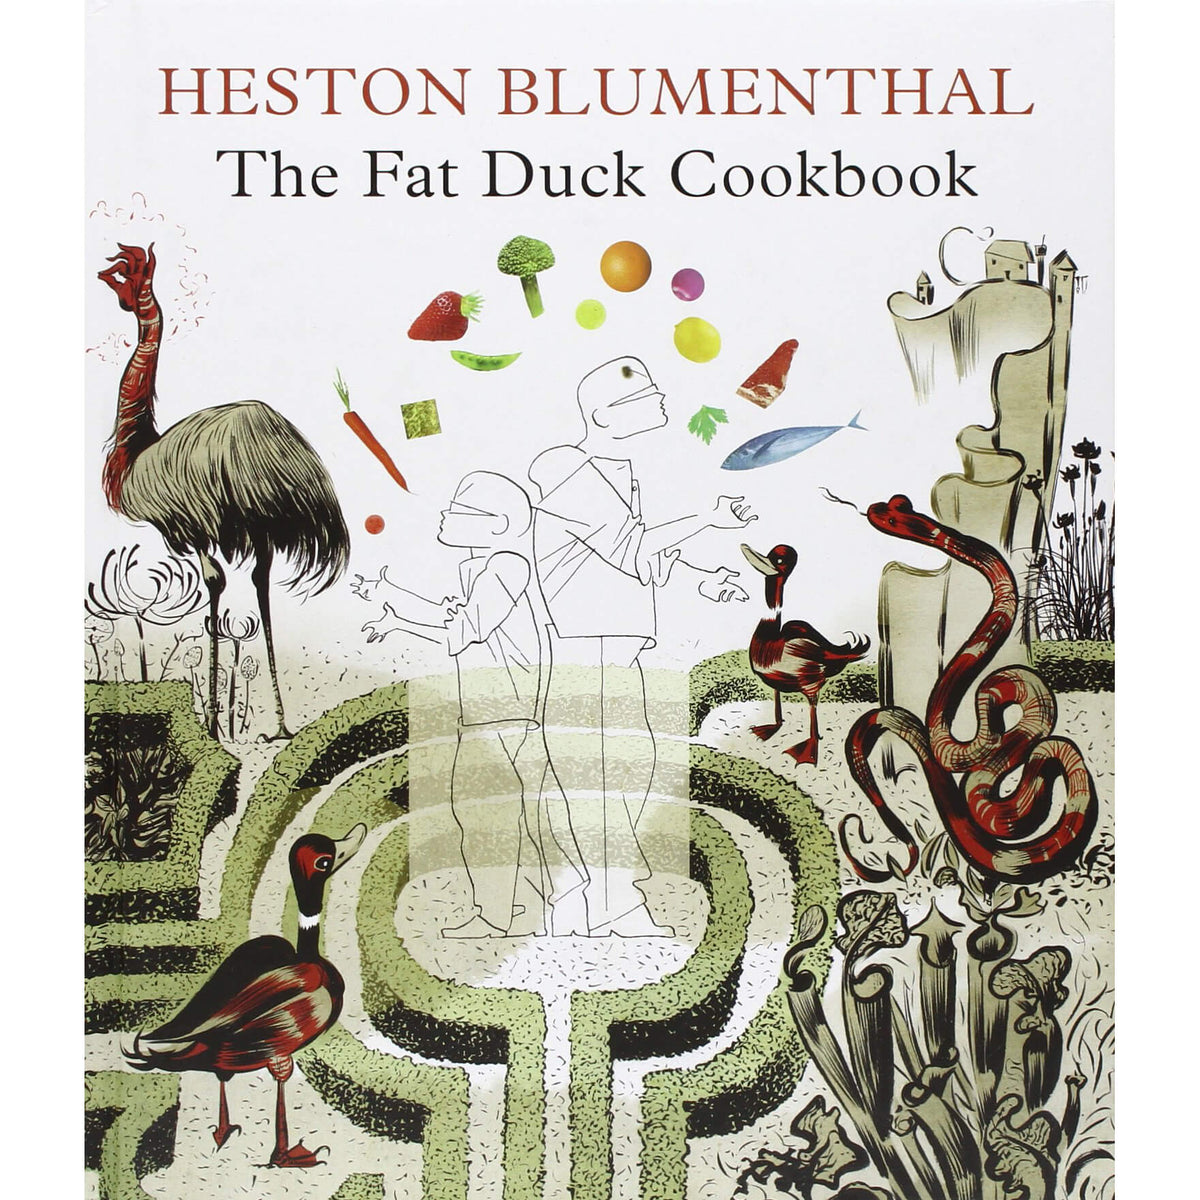 The Fat Duck Cookbook front cover.